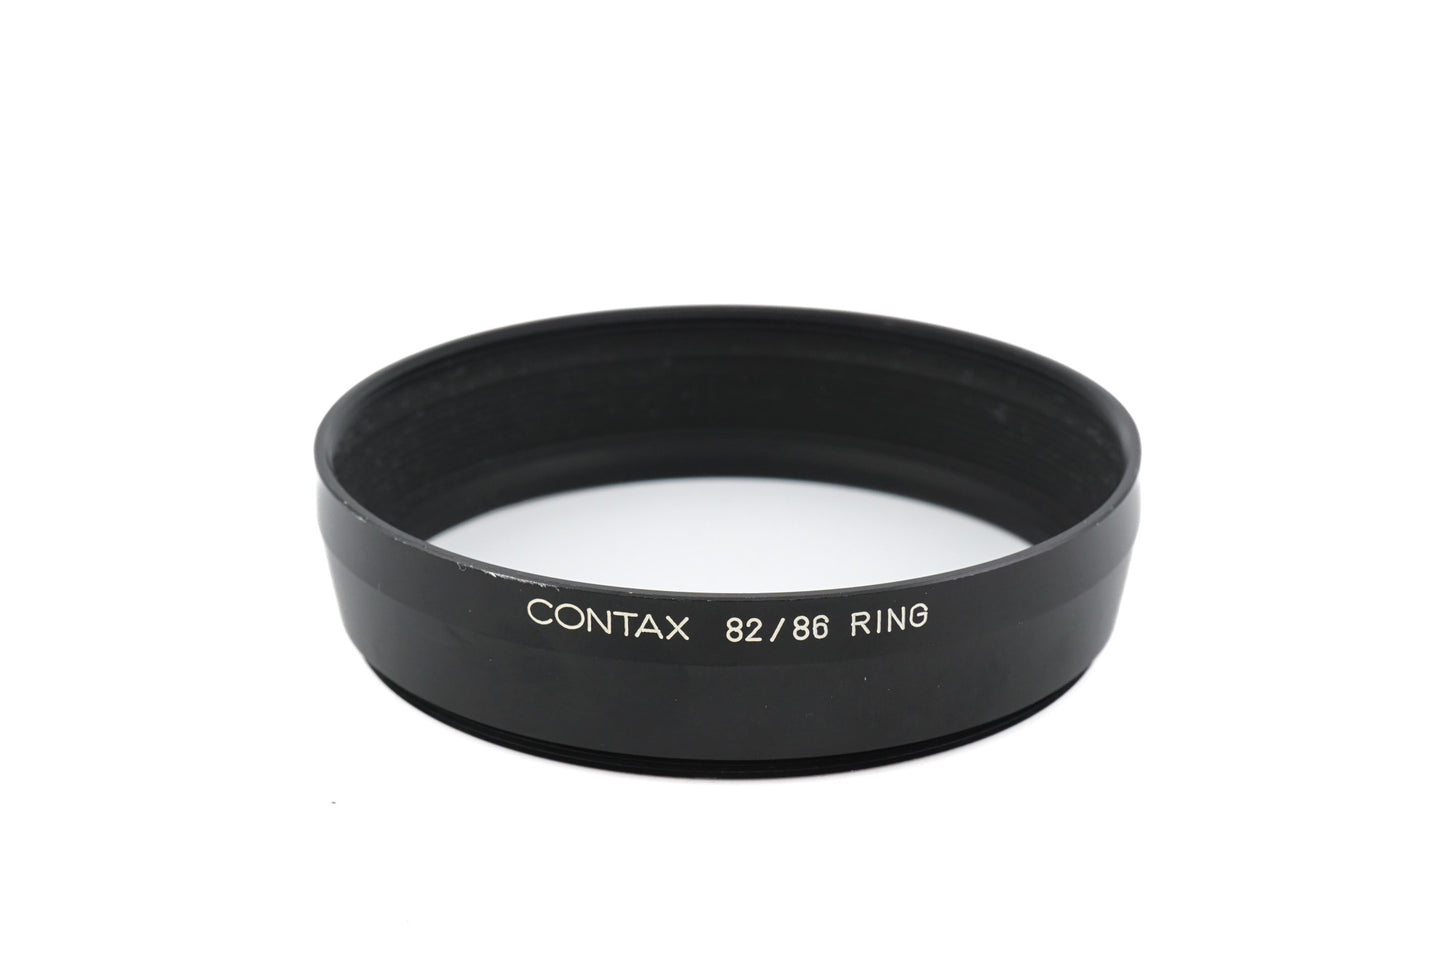 Contax 82/86 Ring